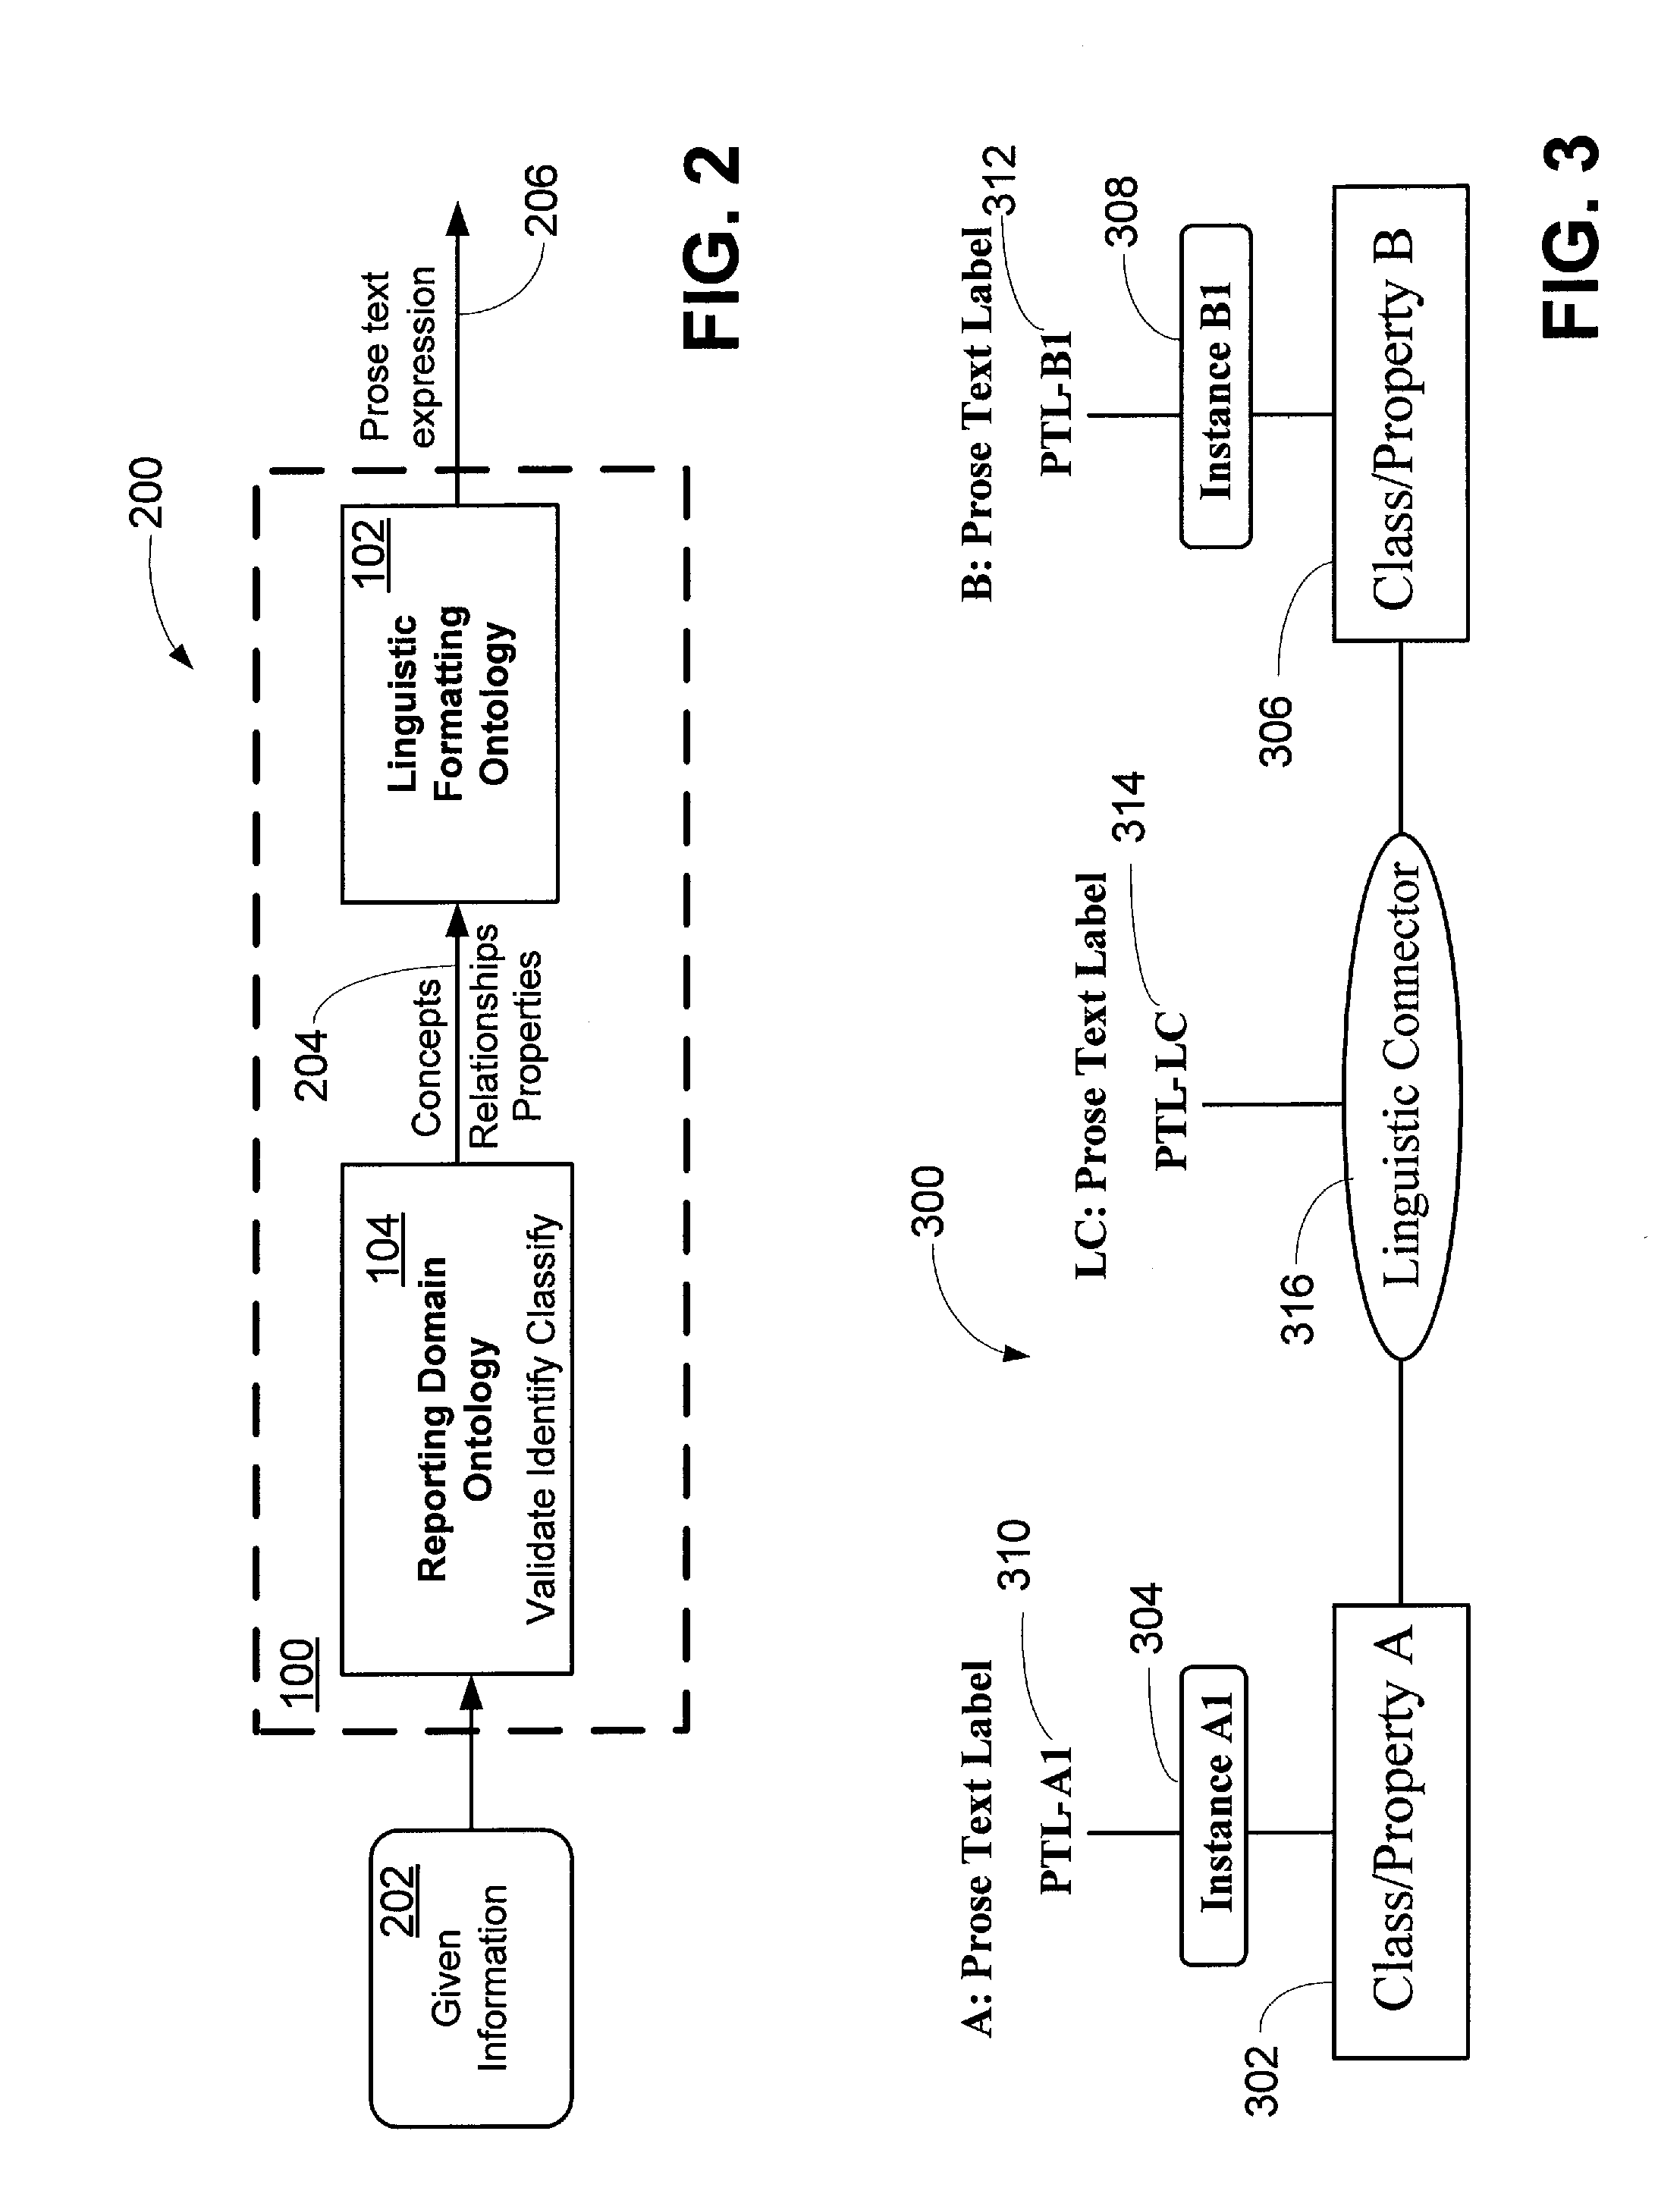 System and method for generating radiological prose text utilizing radiological prose text definition ontology